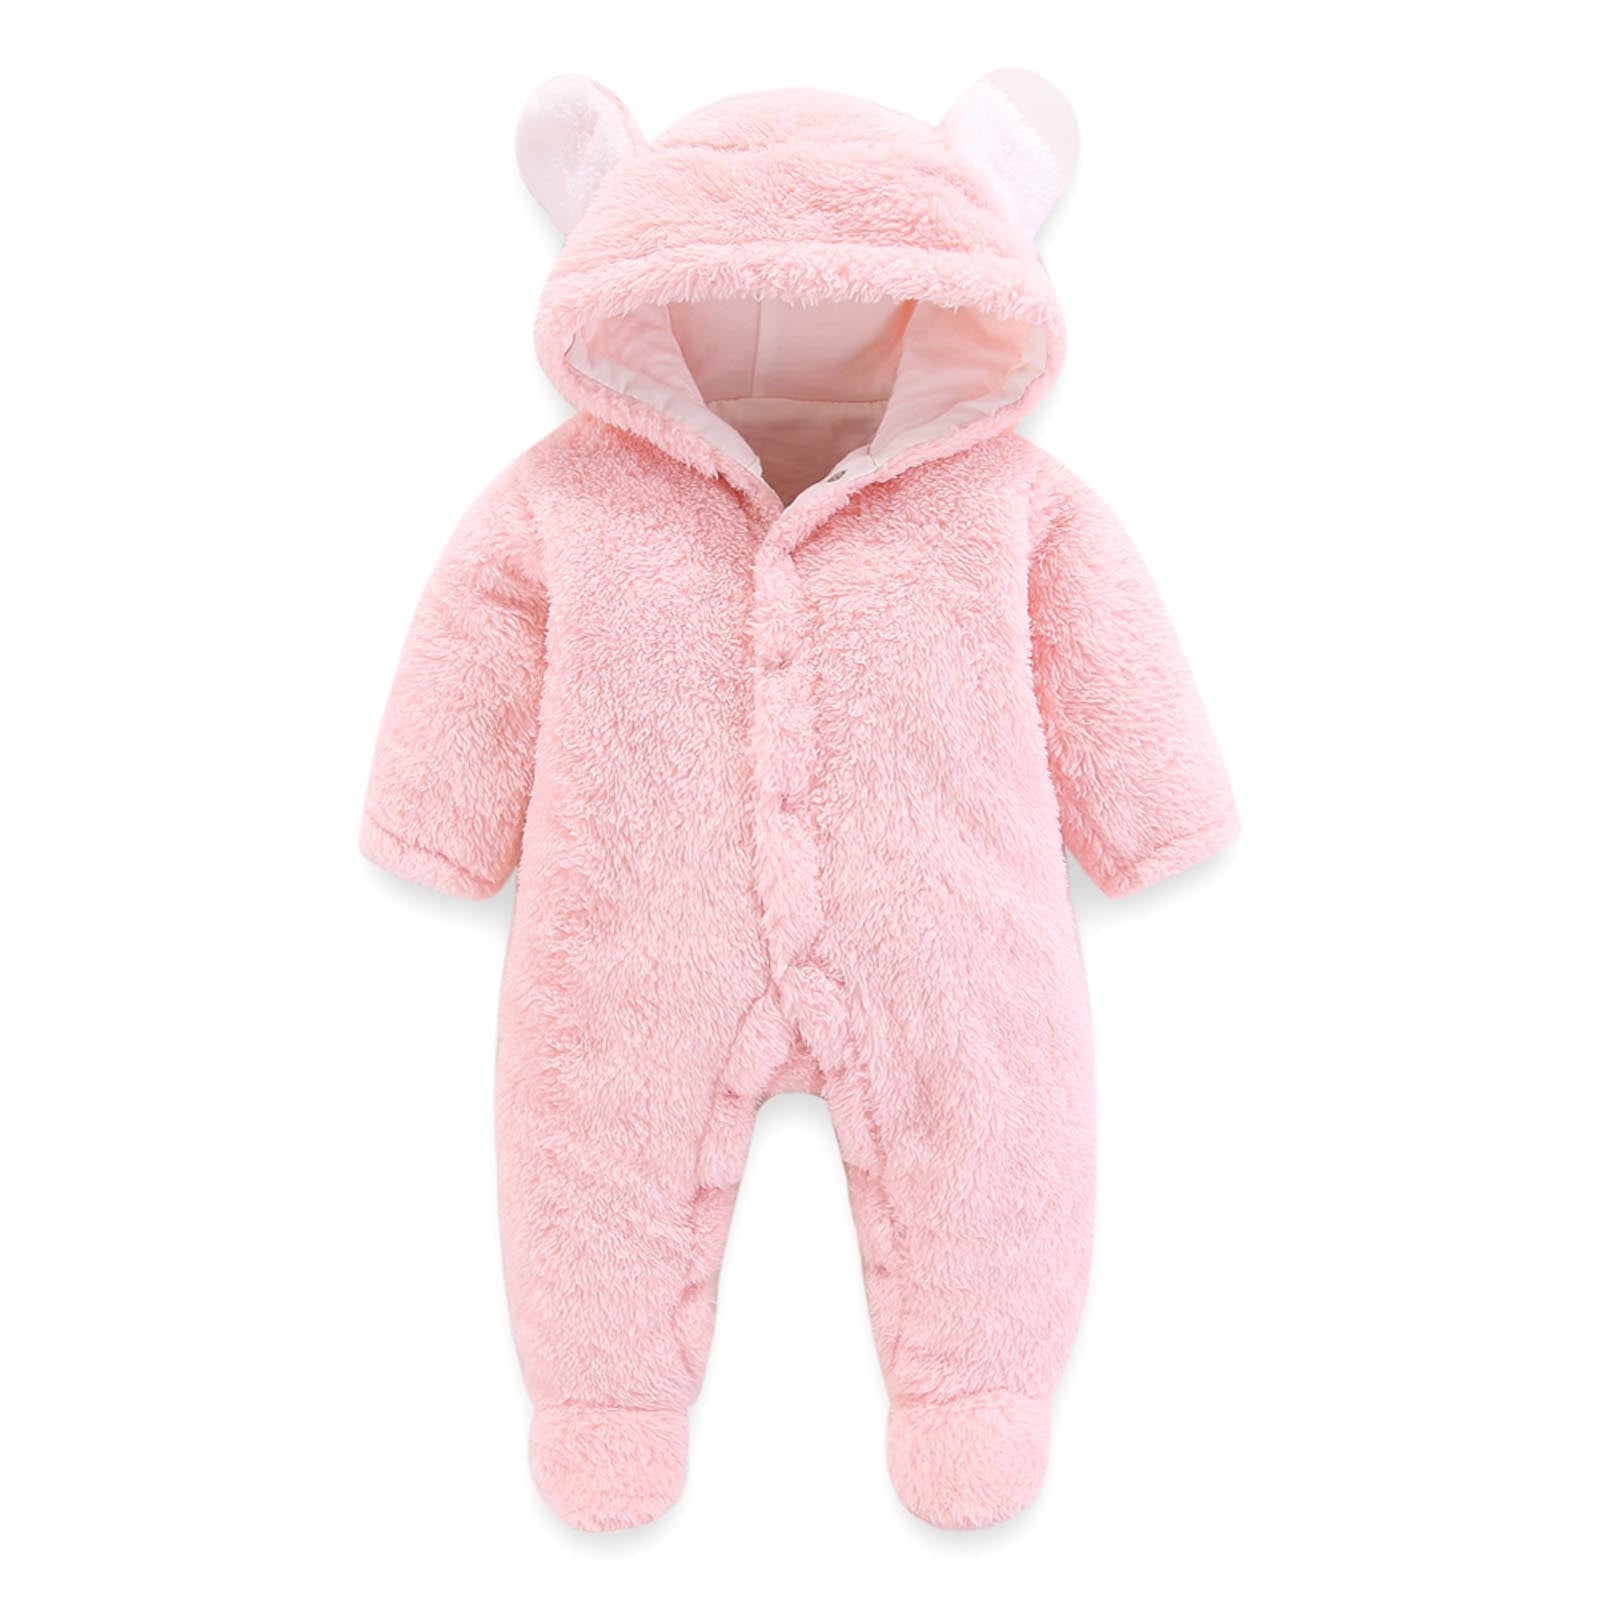 Mama Bear Unisex Long Sleeve Baby Gown Baby Bodysuit Unionsuit Footed Pajamas Romper Jumpsuit 